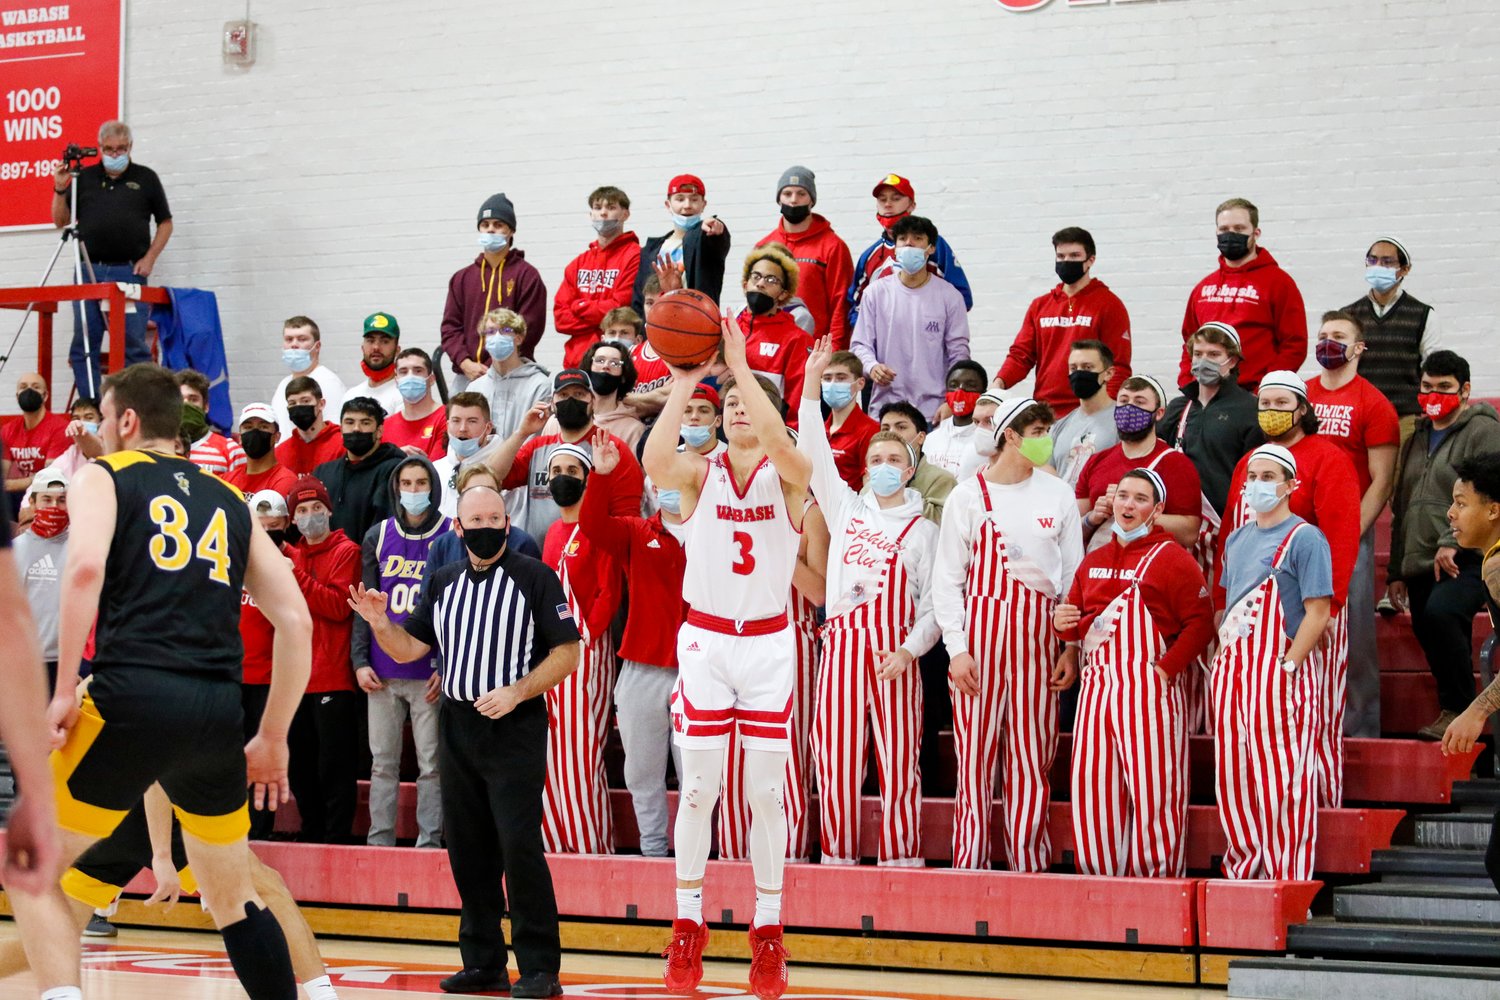 Jack Davidson became the all-time leading scorer in Wabash College Basketball history by scoring 31 points 
in Wabash’s 94-80 over Wooster. Wabash also secured 1st place in the North Coast Athletic Conference.